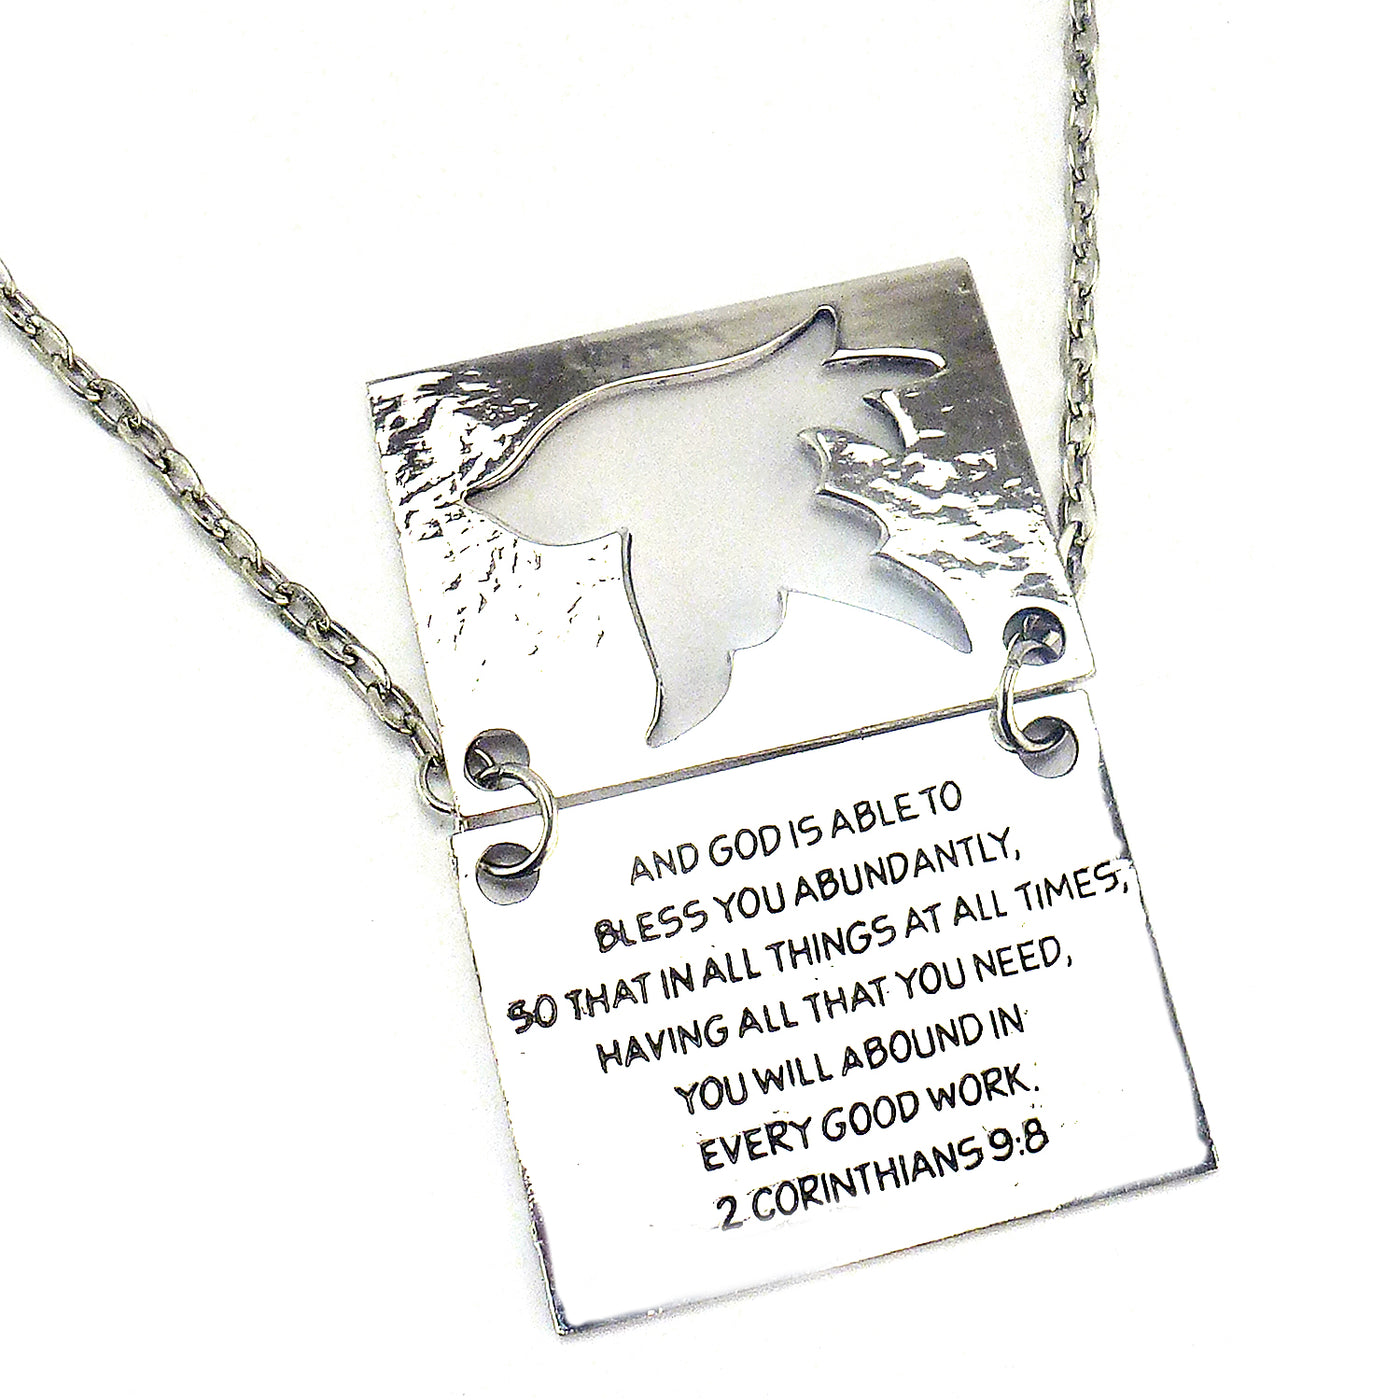 Worthy Necklace-Good Work(s) Make A Difference® | Christian and Inspirational Jewelry Company in Vernon, California